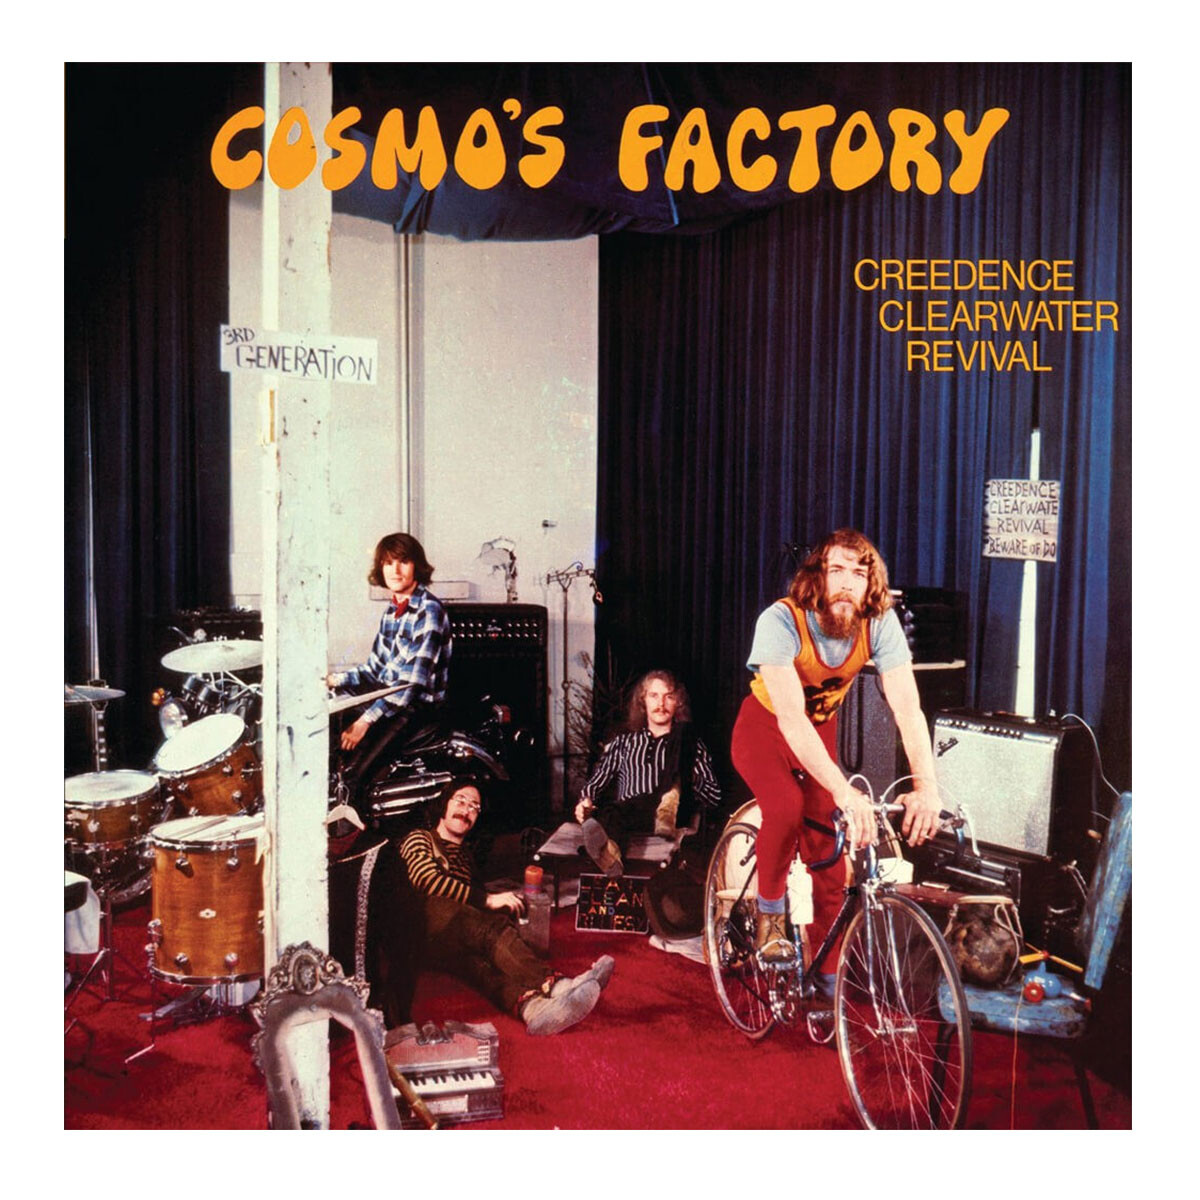 Creedence Clearwater Revival-cosmos Factory - Vinilo 